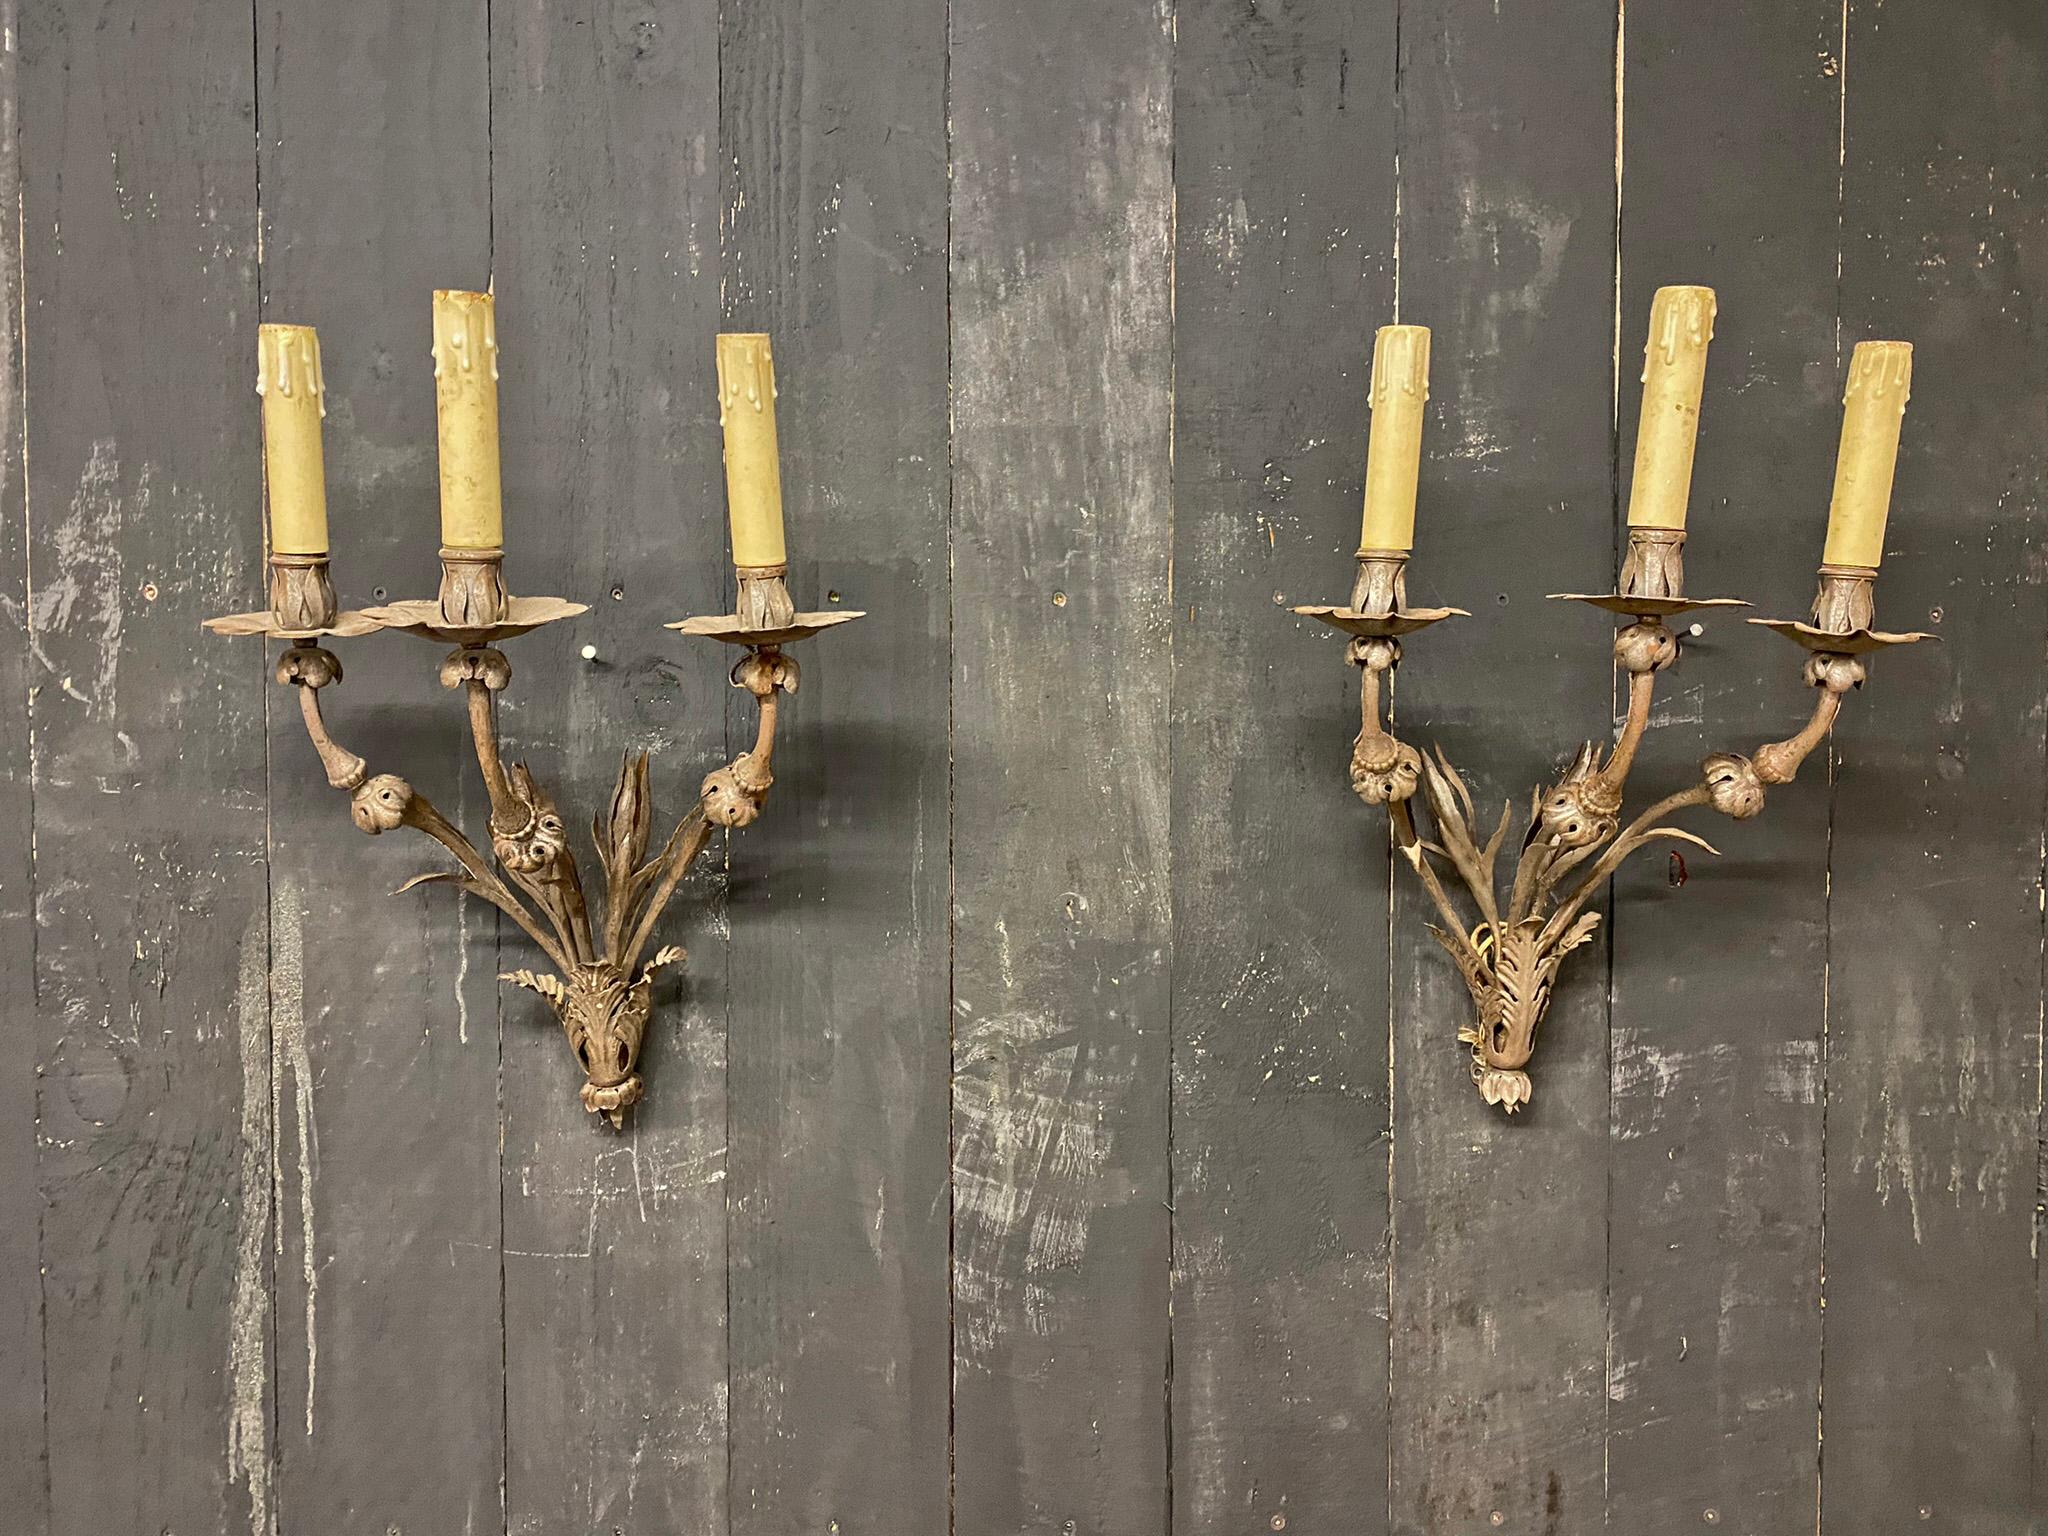 Elegant wrought iron sconces from a chateau in central France. around 1940/1950
3 Wall lights with 3 lights.
the price is for one, 3 are available

The iron has not been lacquered, not treated and tends to oxidize.
They are sold as is, possibility